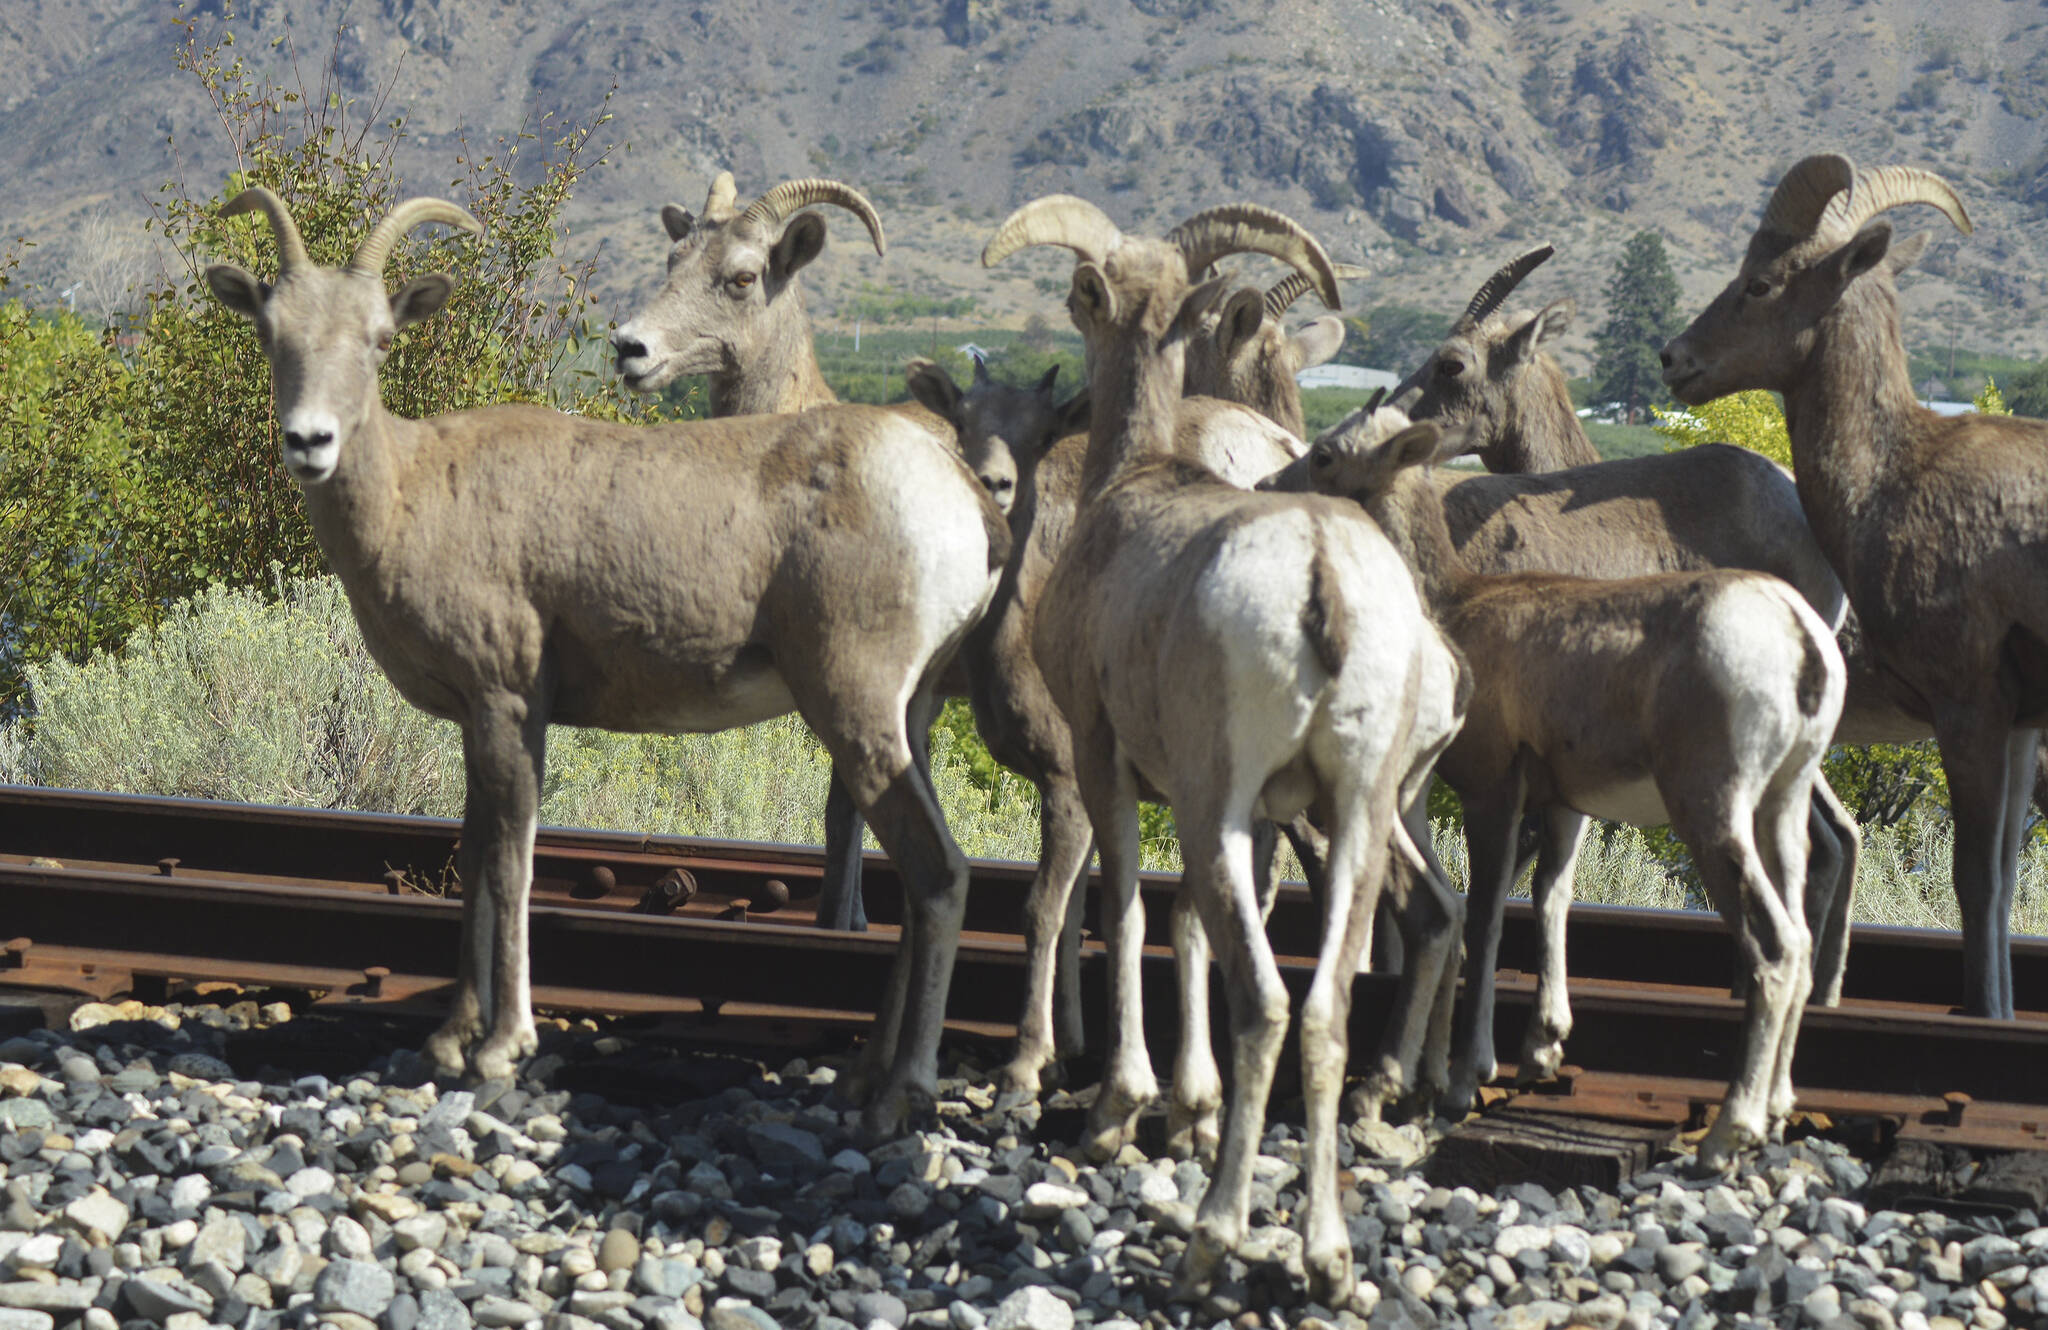 Majestic bullhorn sheep can be seen in Penticton and the drive there from Washington.